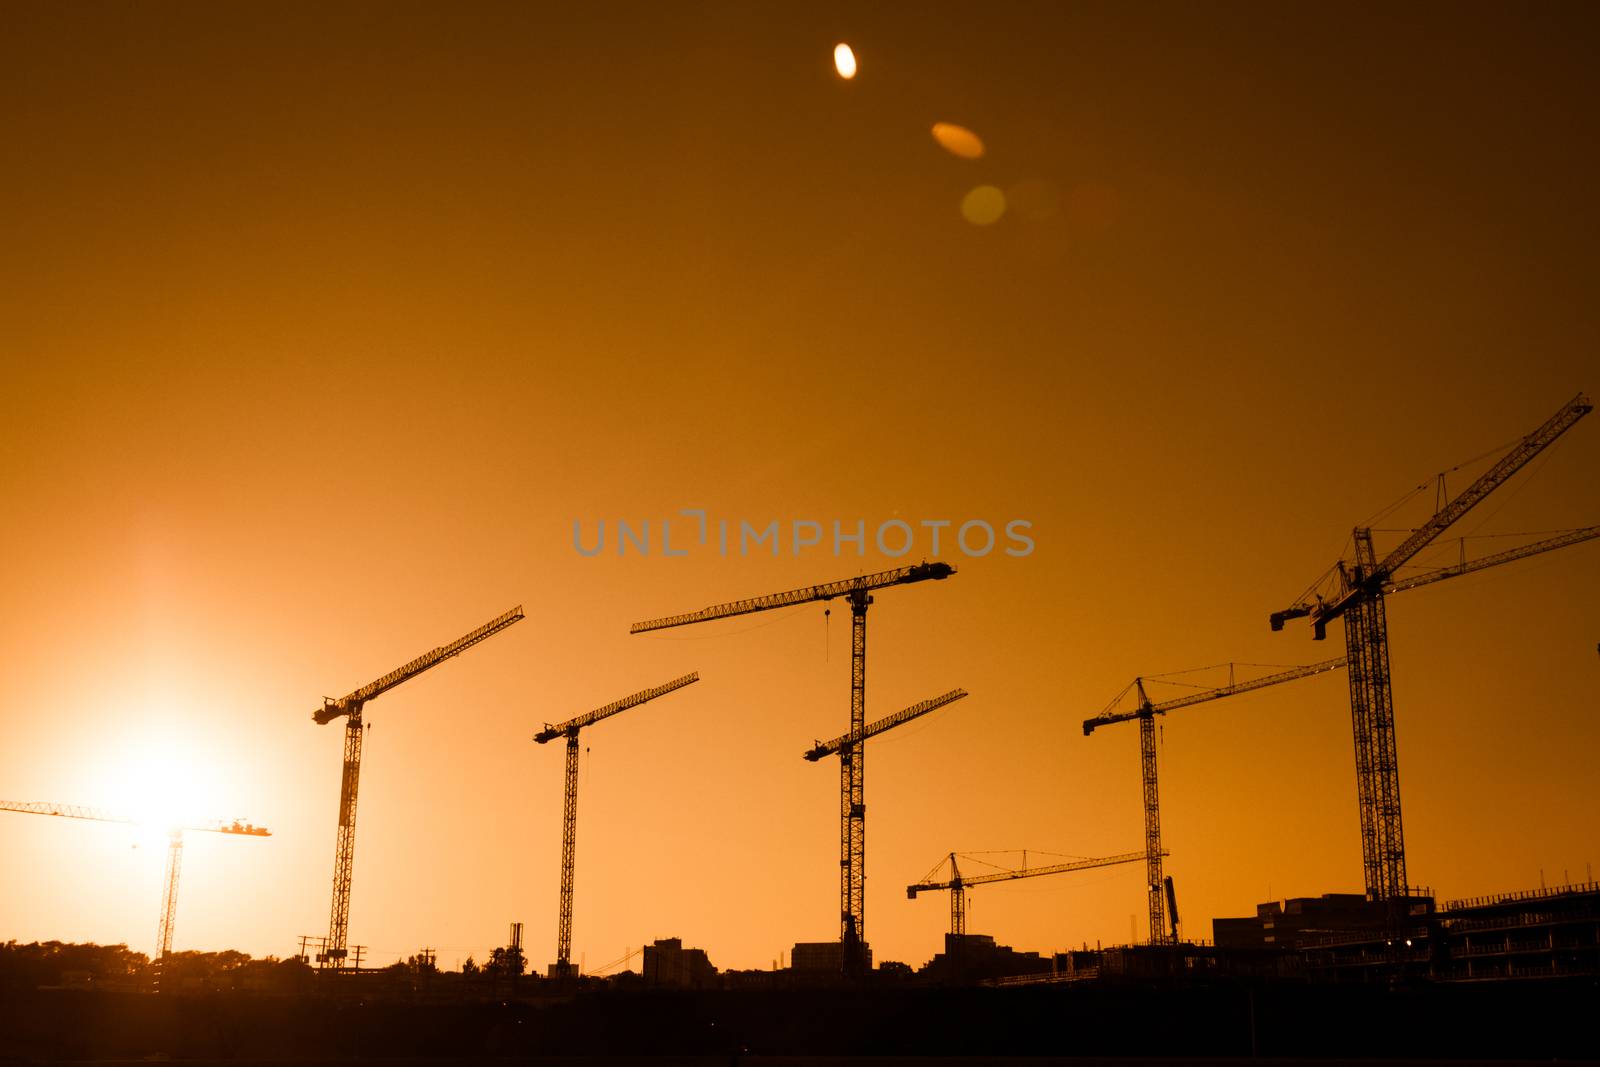 Crane Silhouette of a big Construction Site in the Evening